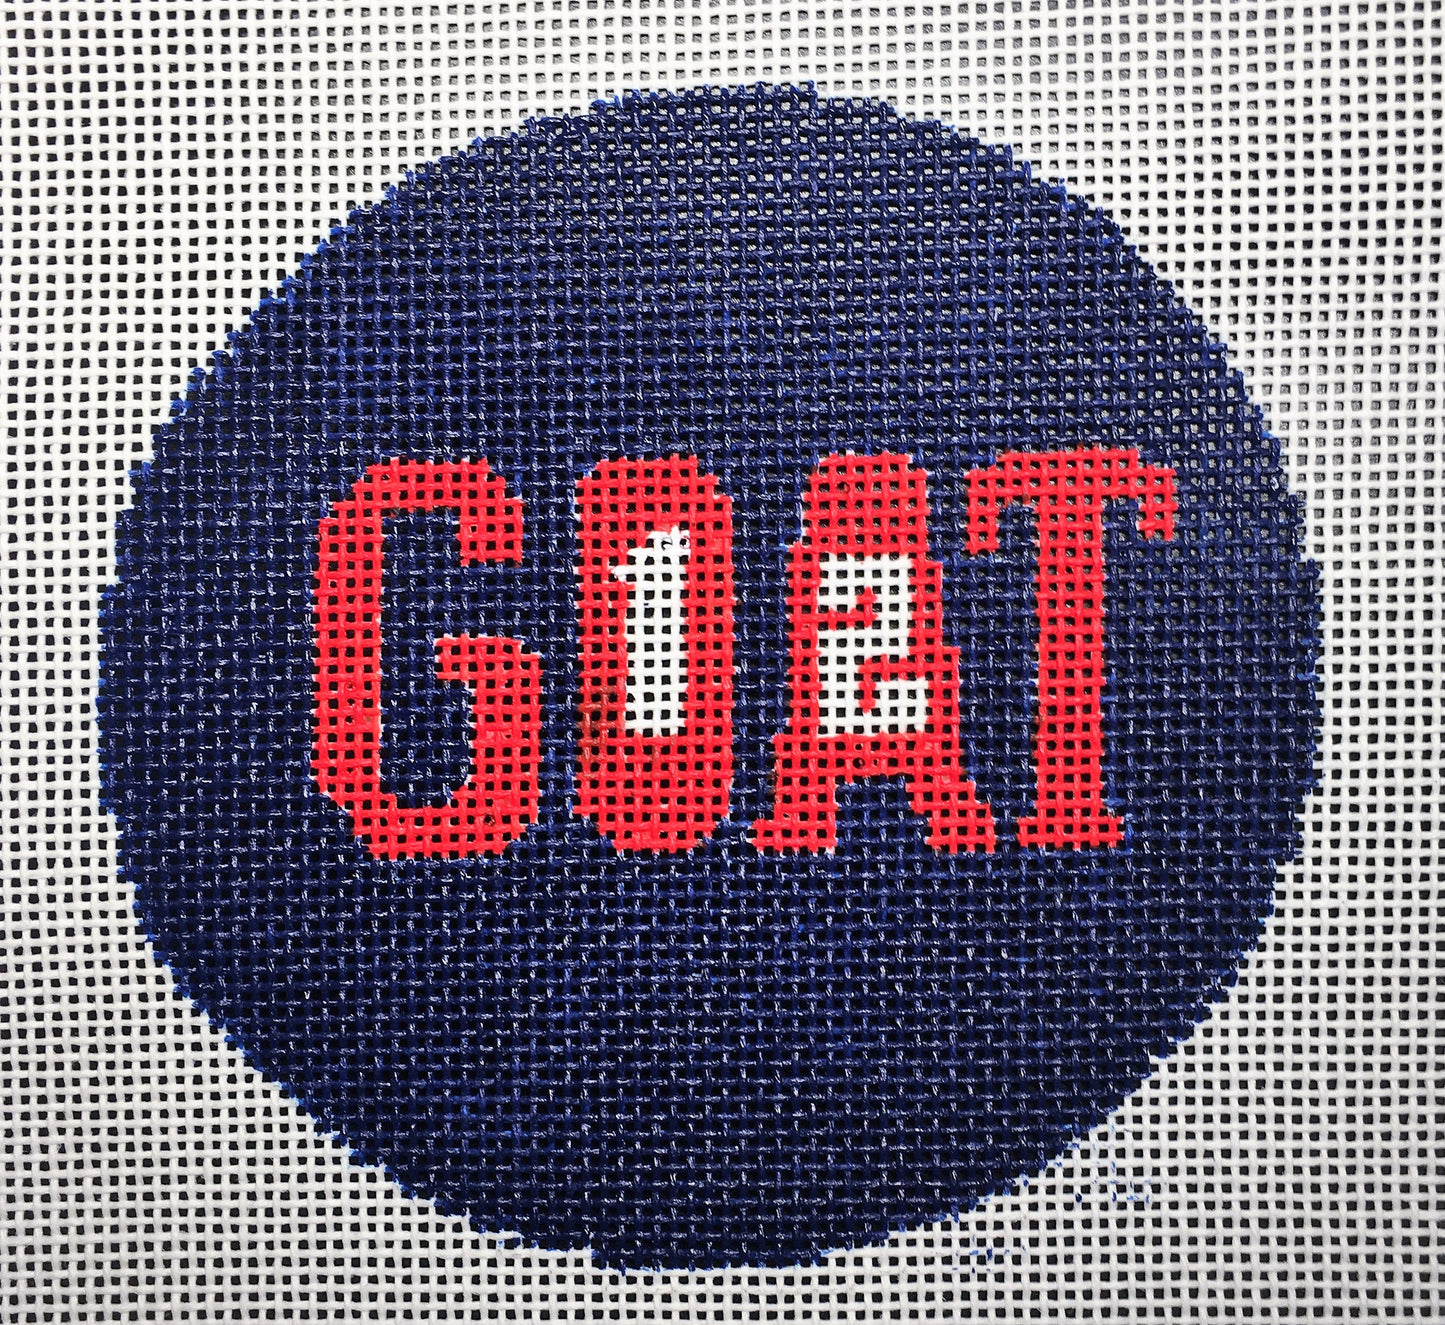 Vallerie Needlepoint Gallery round New England Patriots football teamneedlepoint canvas that says "goat" (greatest of all time) with the number 12 inset for quarterback Tom Brady